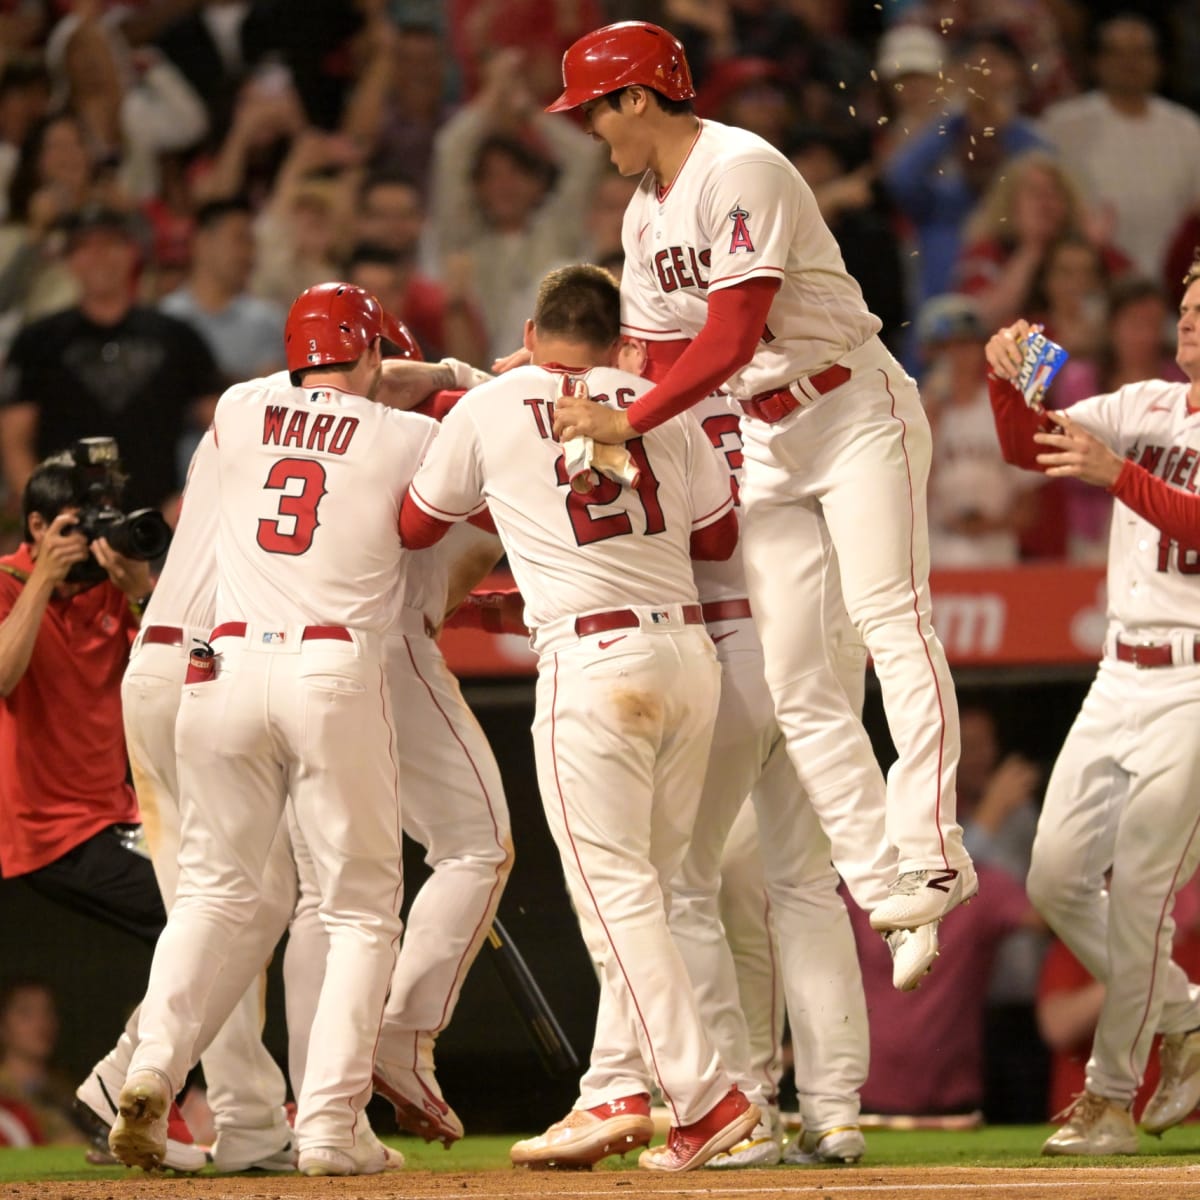 Los Angeles Angels Join Exclusive Club in Baseball History with